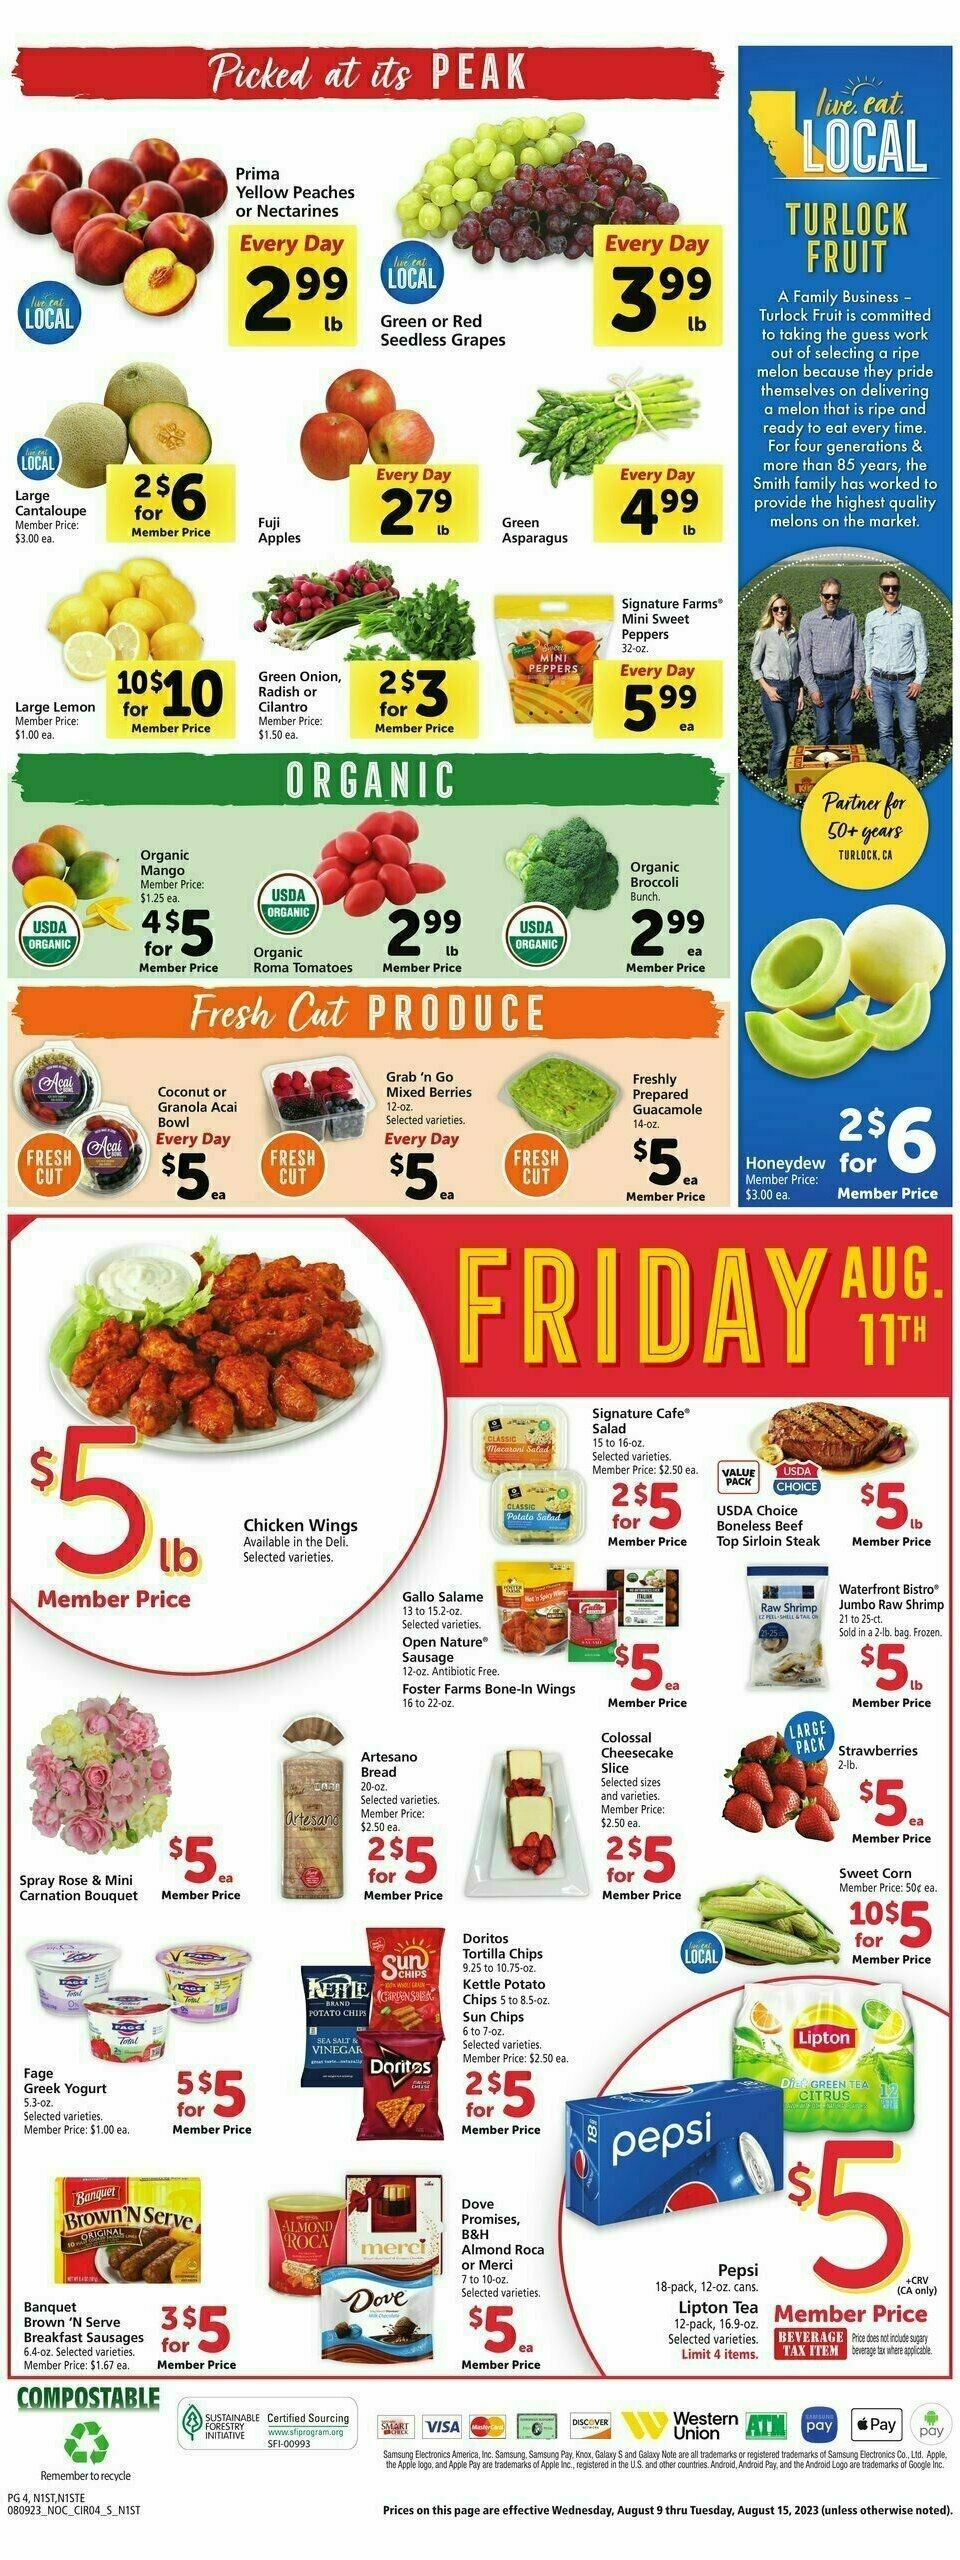 Safeway Weekly Ad from August 9